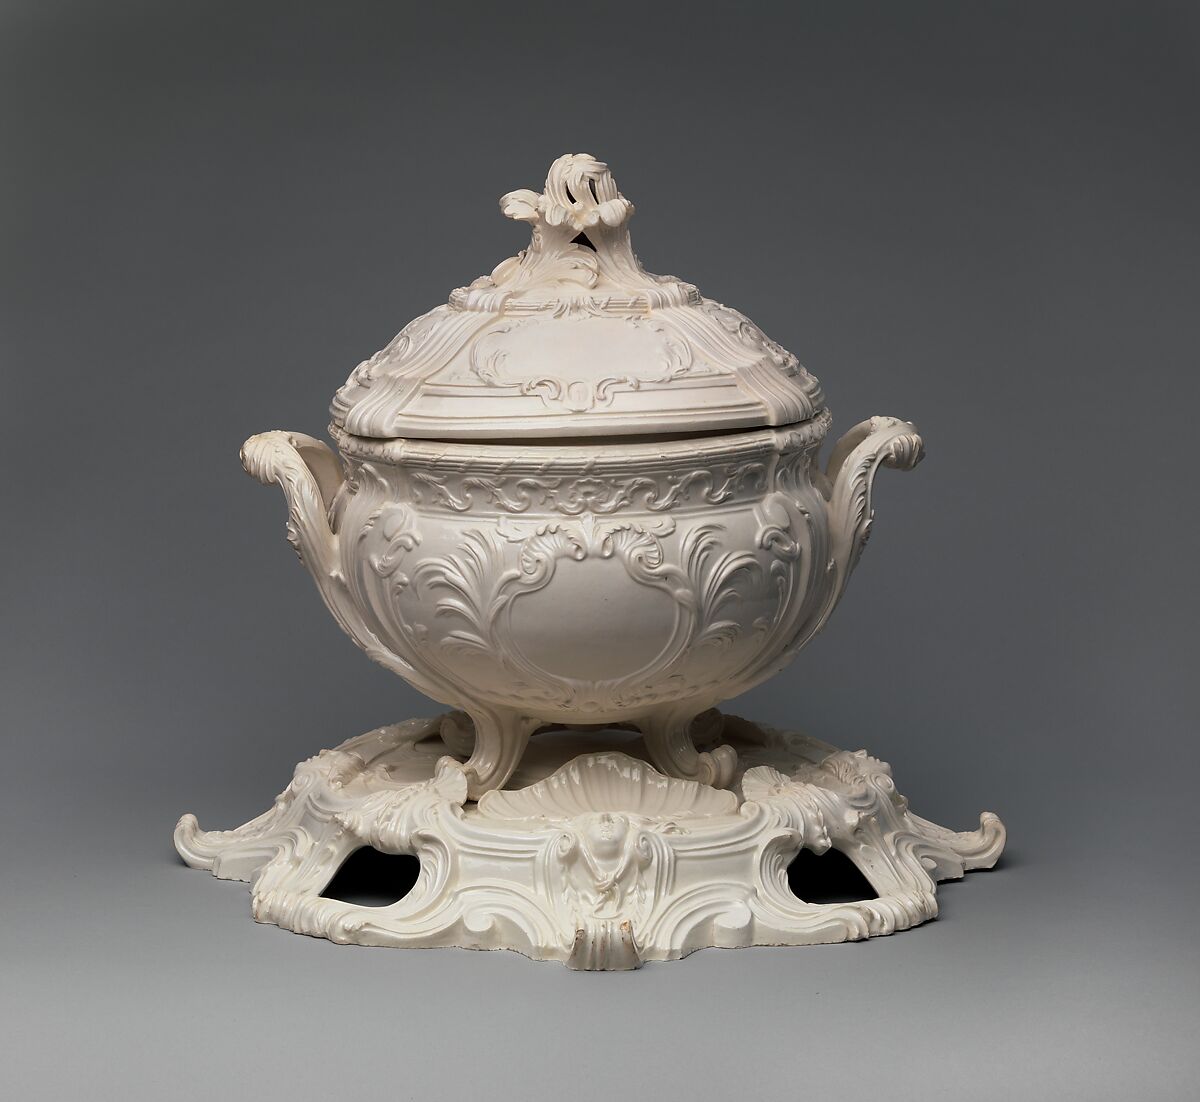 Tureen with cover and plateau, Pont-aux-Choux, Faience fine (lead-glazed earthenware), French, Paris 